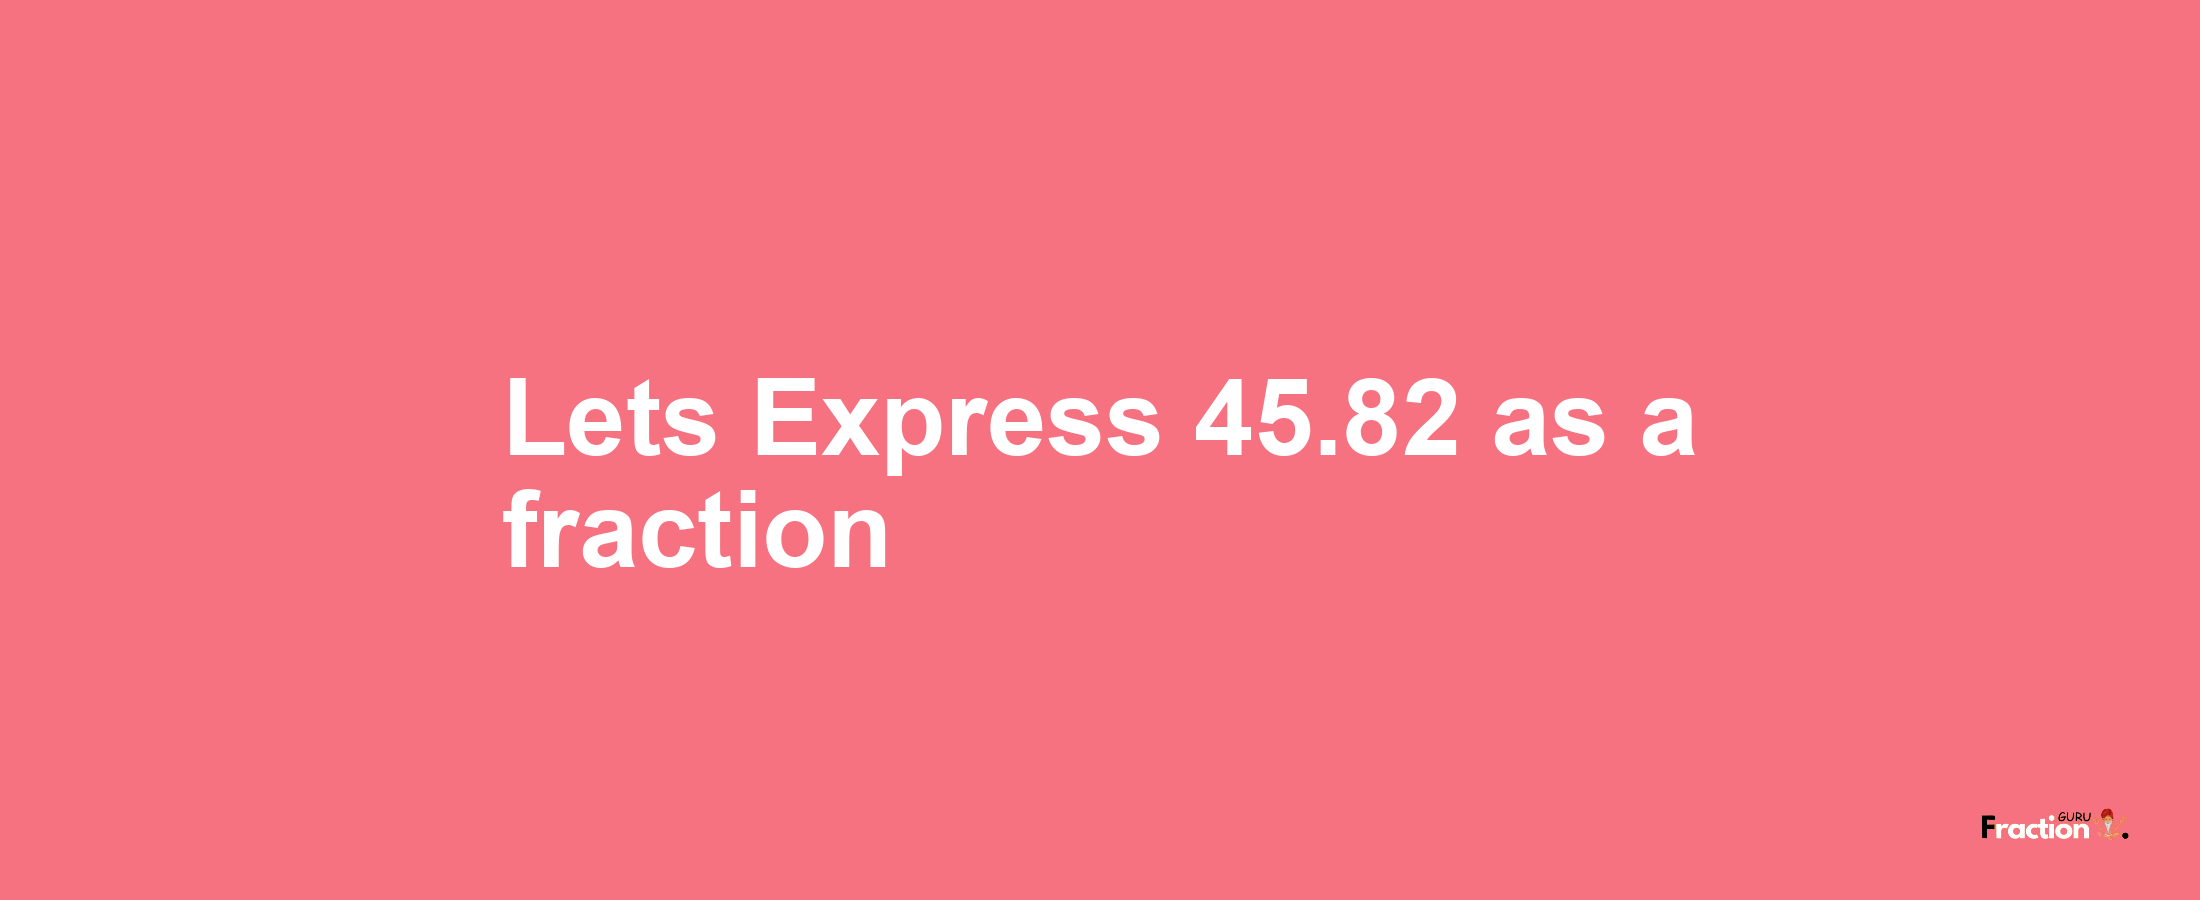 Lets Express 45.82 as afraction